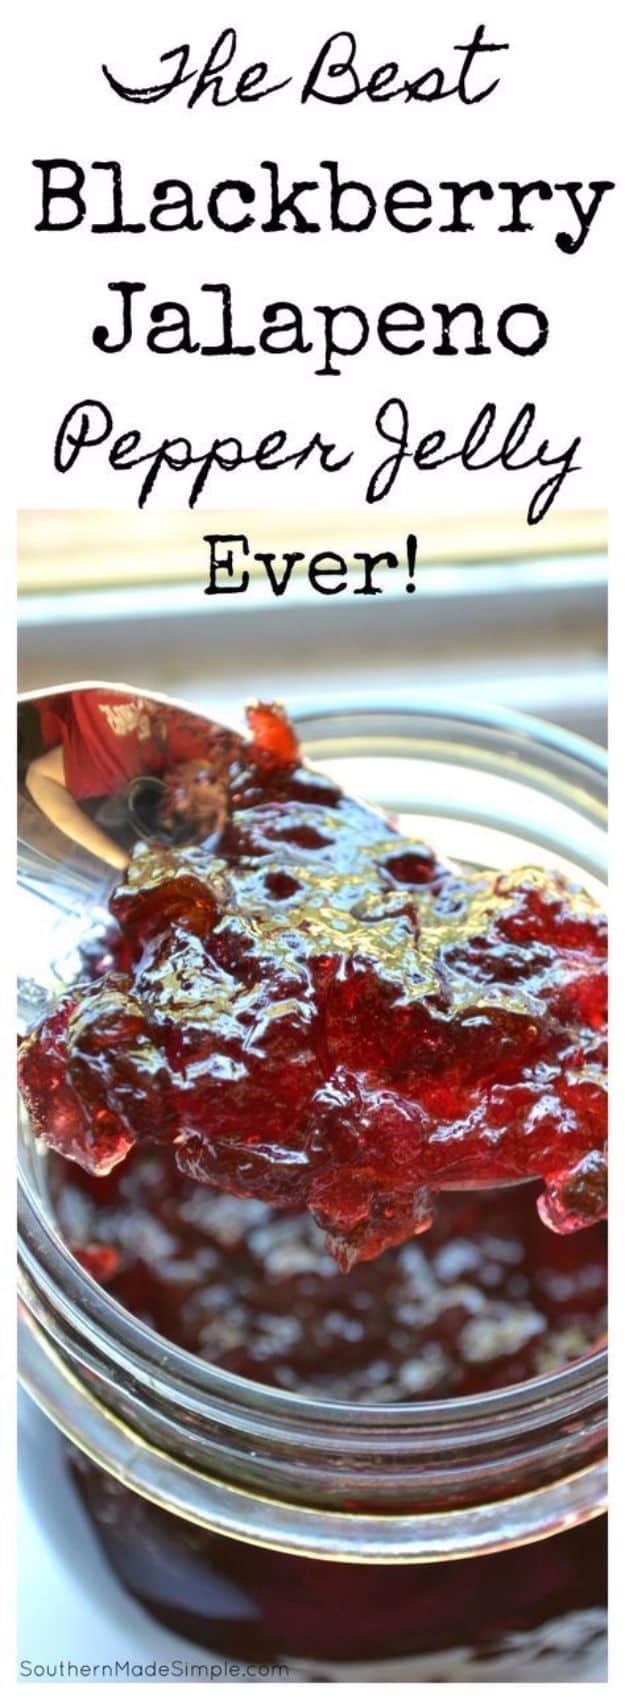 Best Jam and Jelly Recipes - Blackberry Jalapeño Pepper Jelly - Homemade Recipe Ideas For Canning - Easy and Unique Jams and Jellies Made With Strawberry, Raspberry, Blackberry, Peach and Fruit - Healthy, Sugar Free, No Pectin, Small Batch, Savory and Freezer Recipes #recipes #jelly